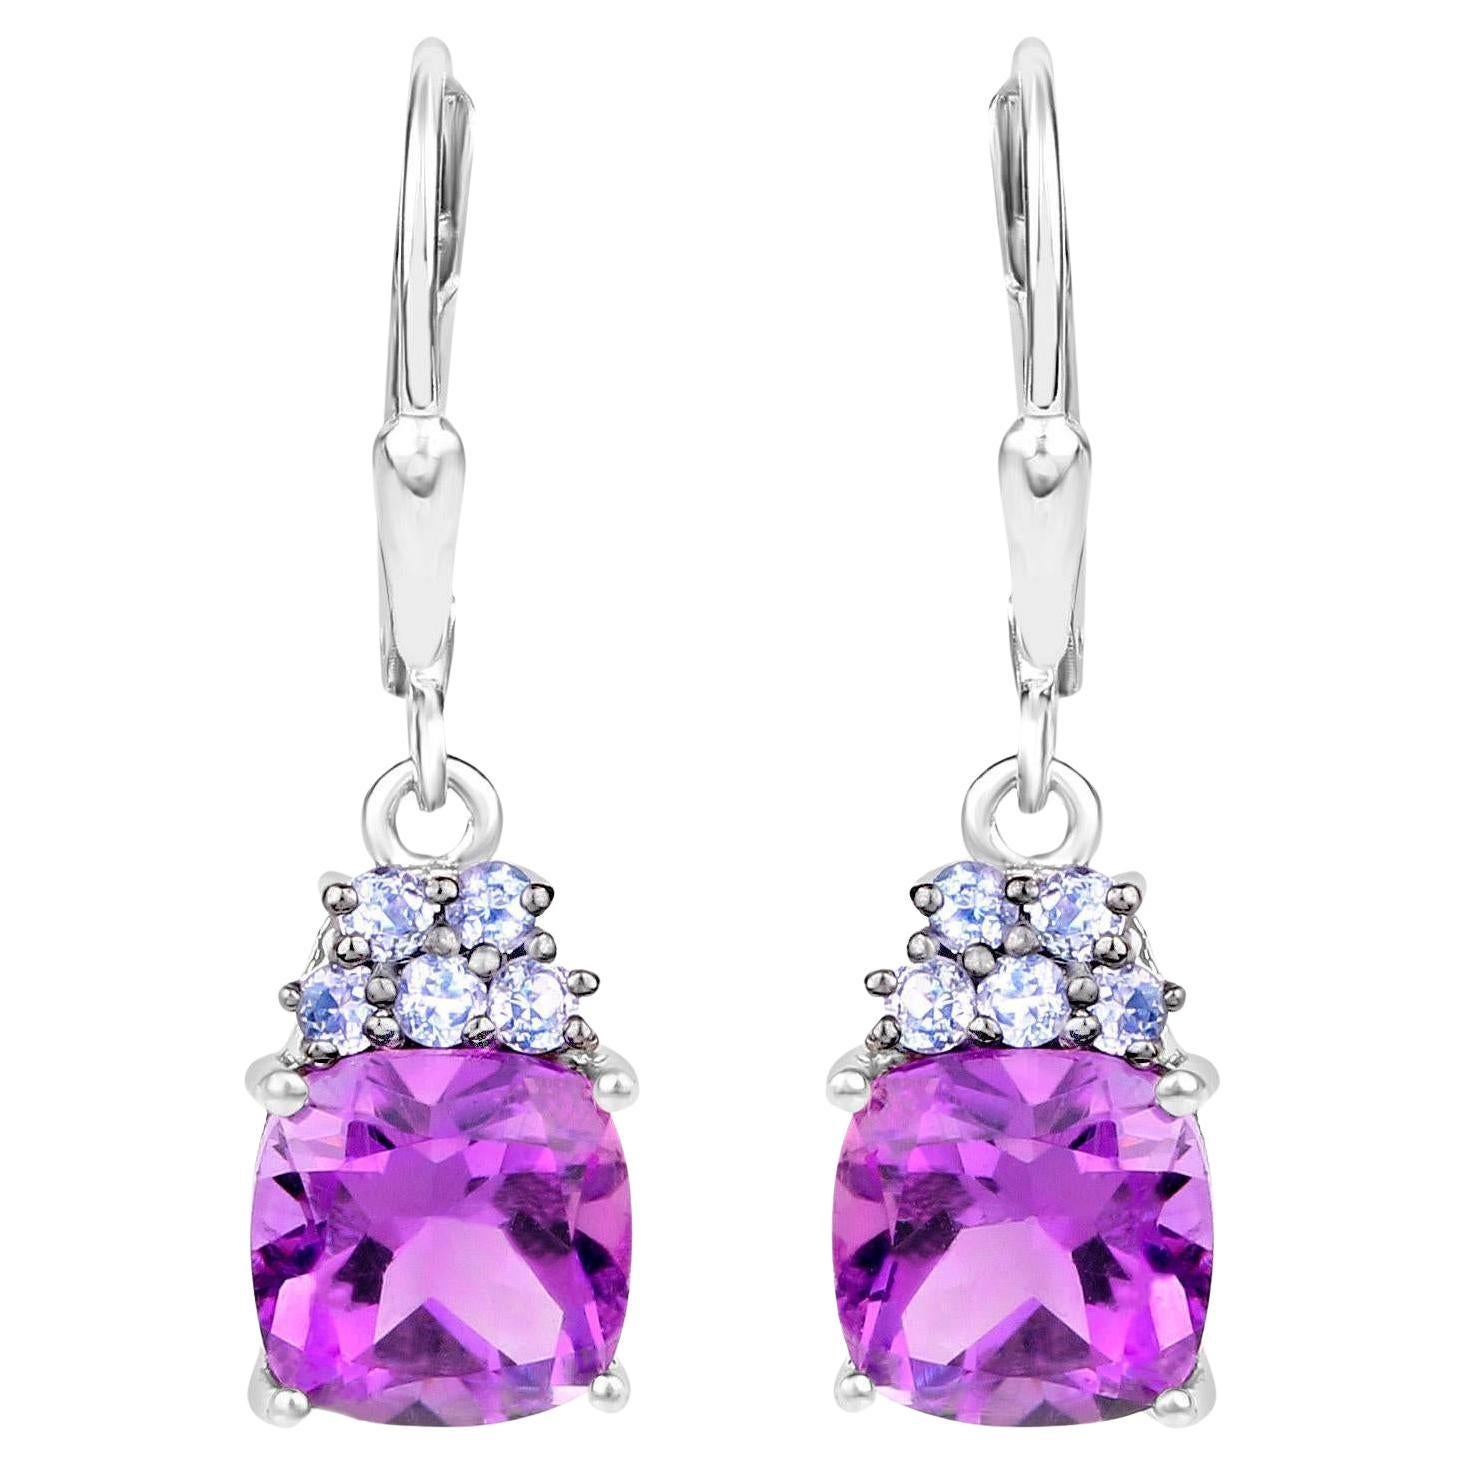 Amethyst Dangle Earrings With Tanzanites 4 Carats Rhodium Plated Sterling Silver